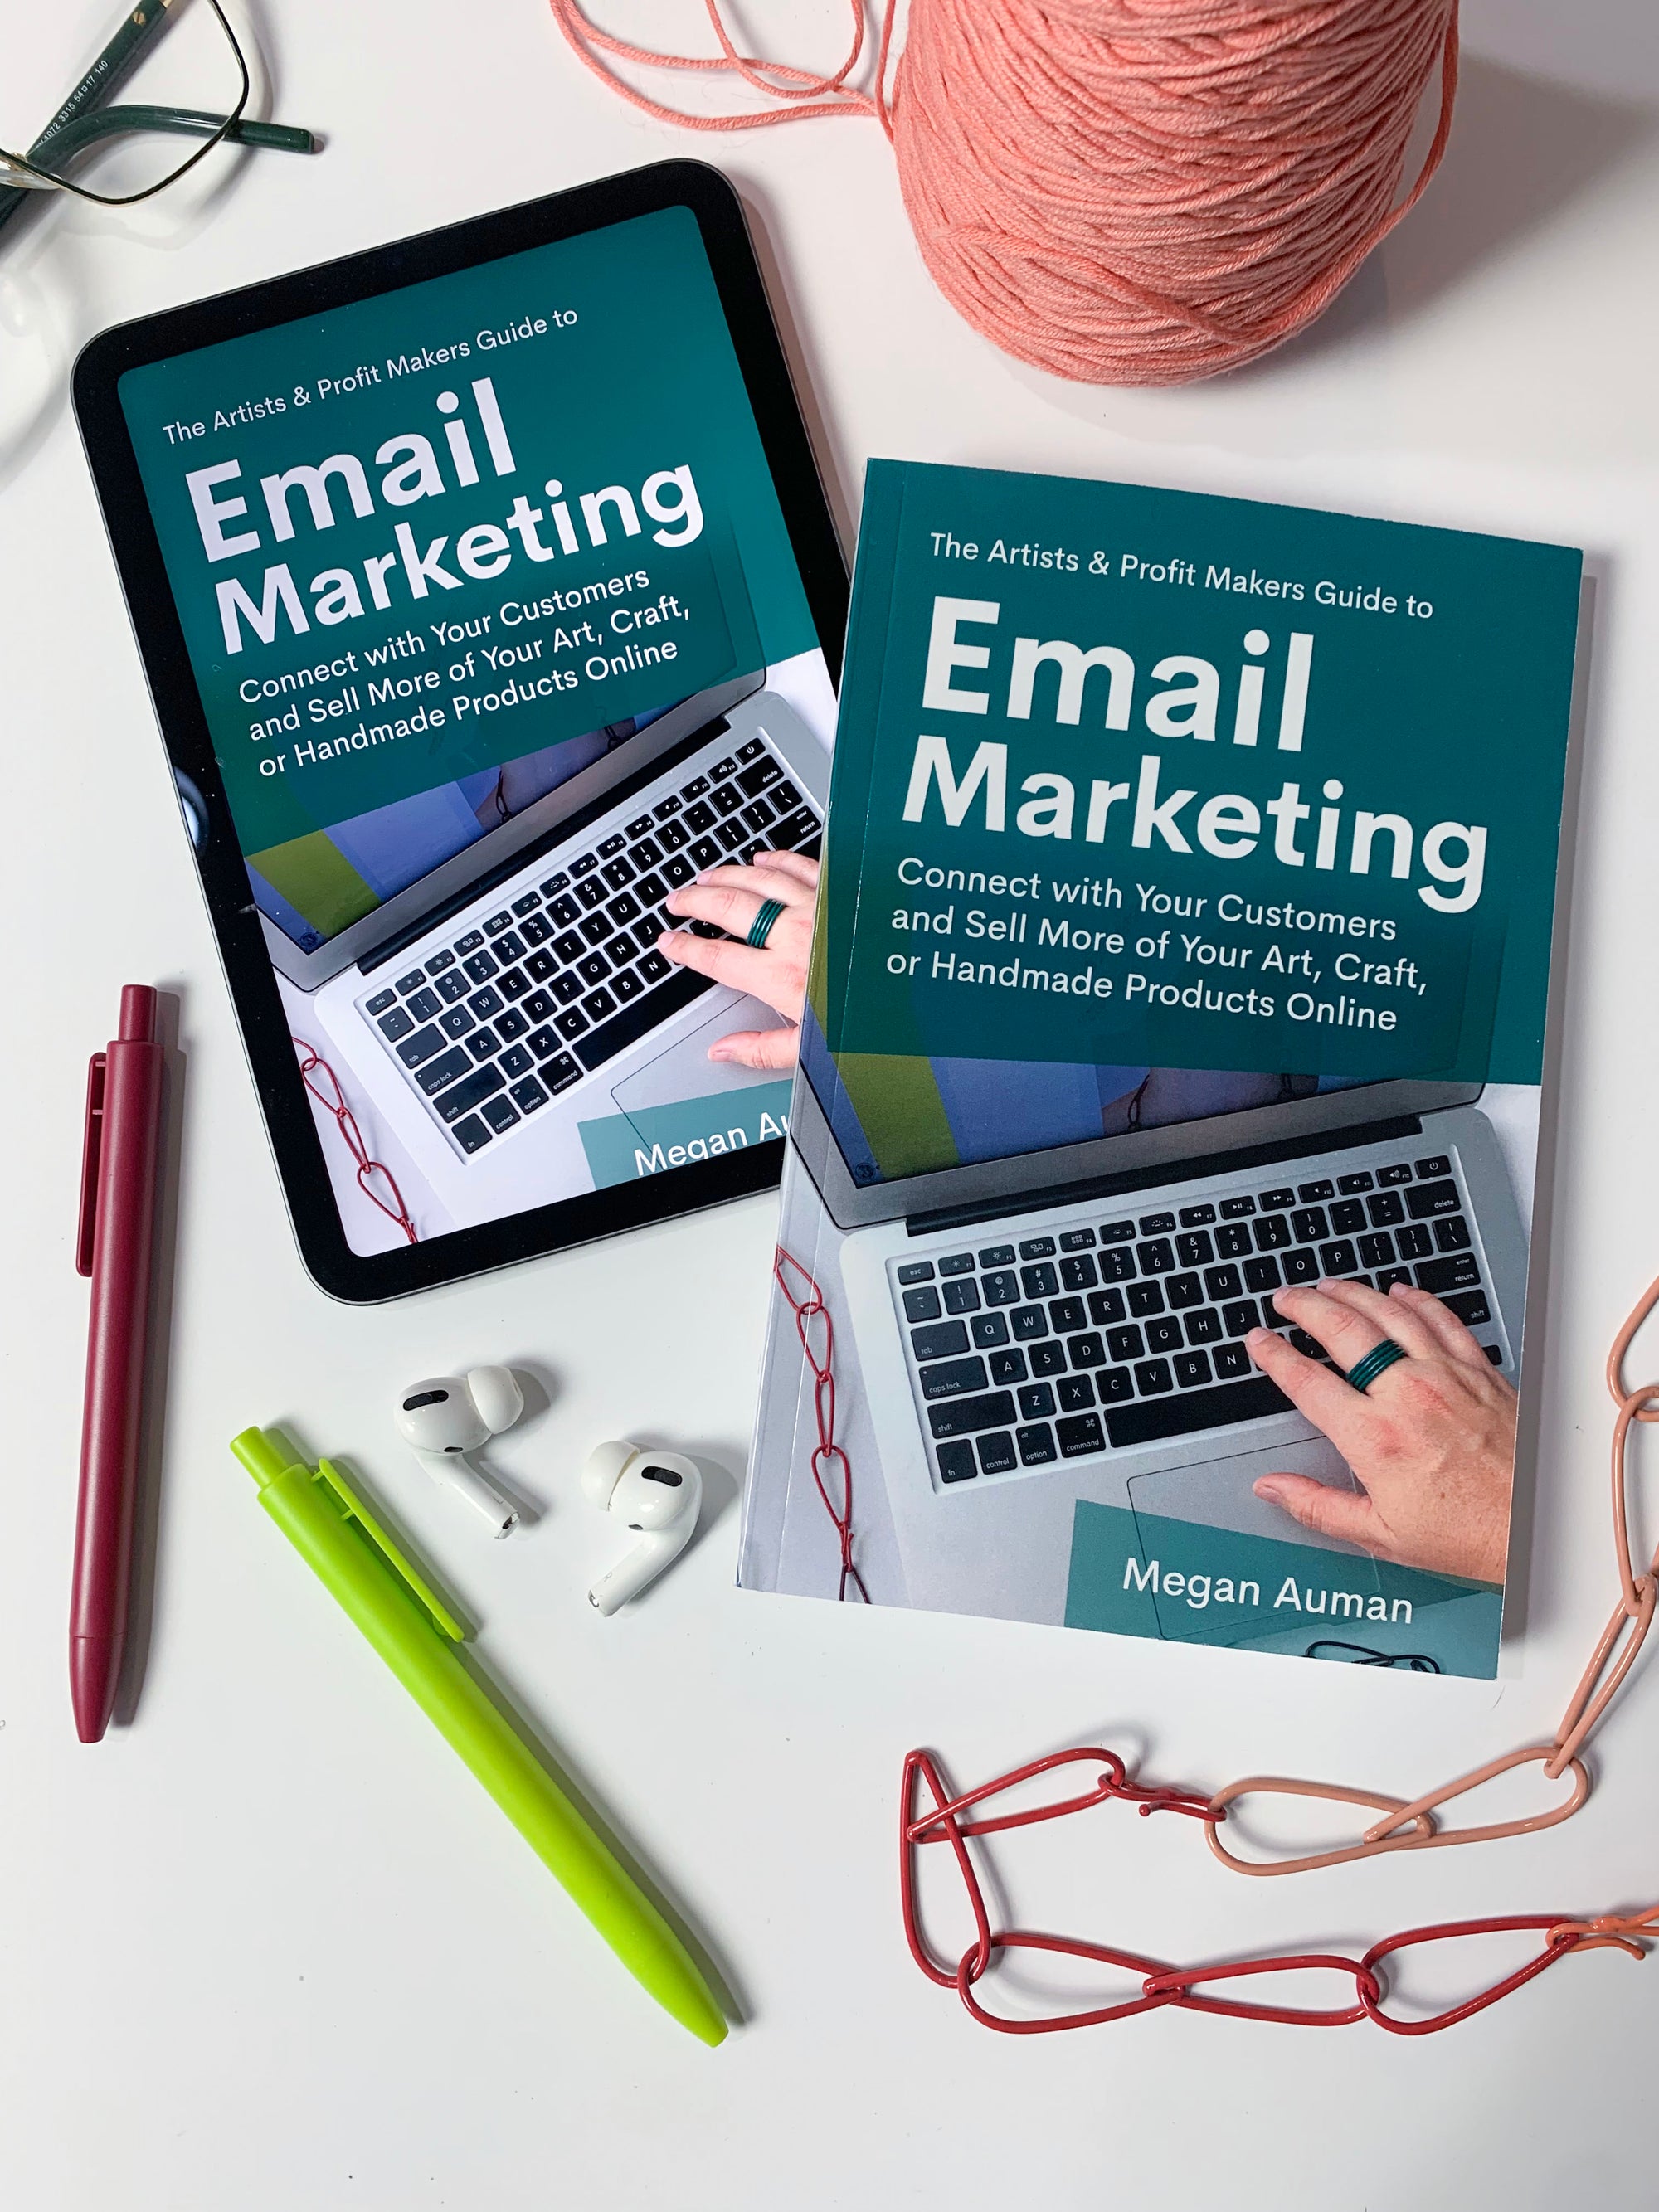 The Artists & Profit Makers Guide to Email Marketing